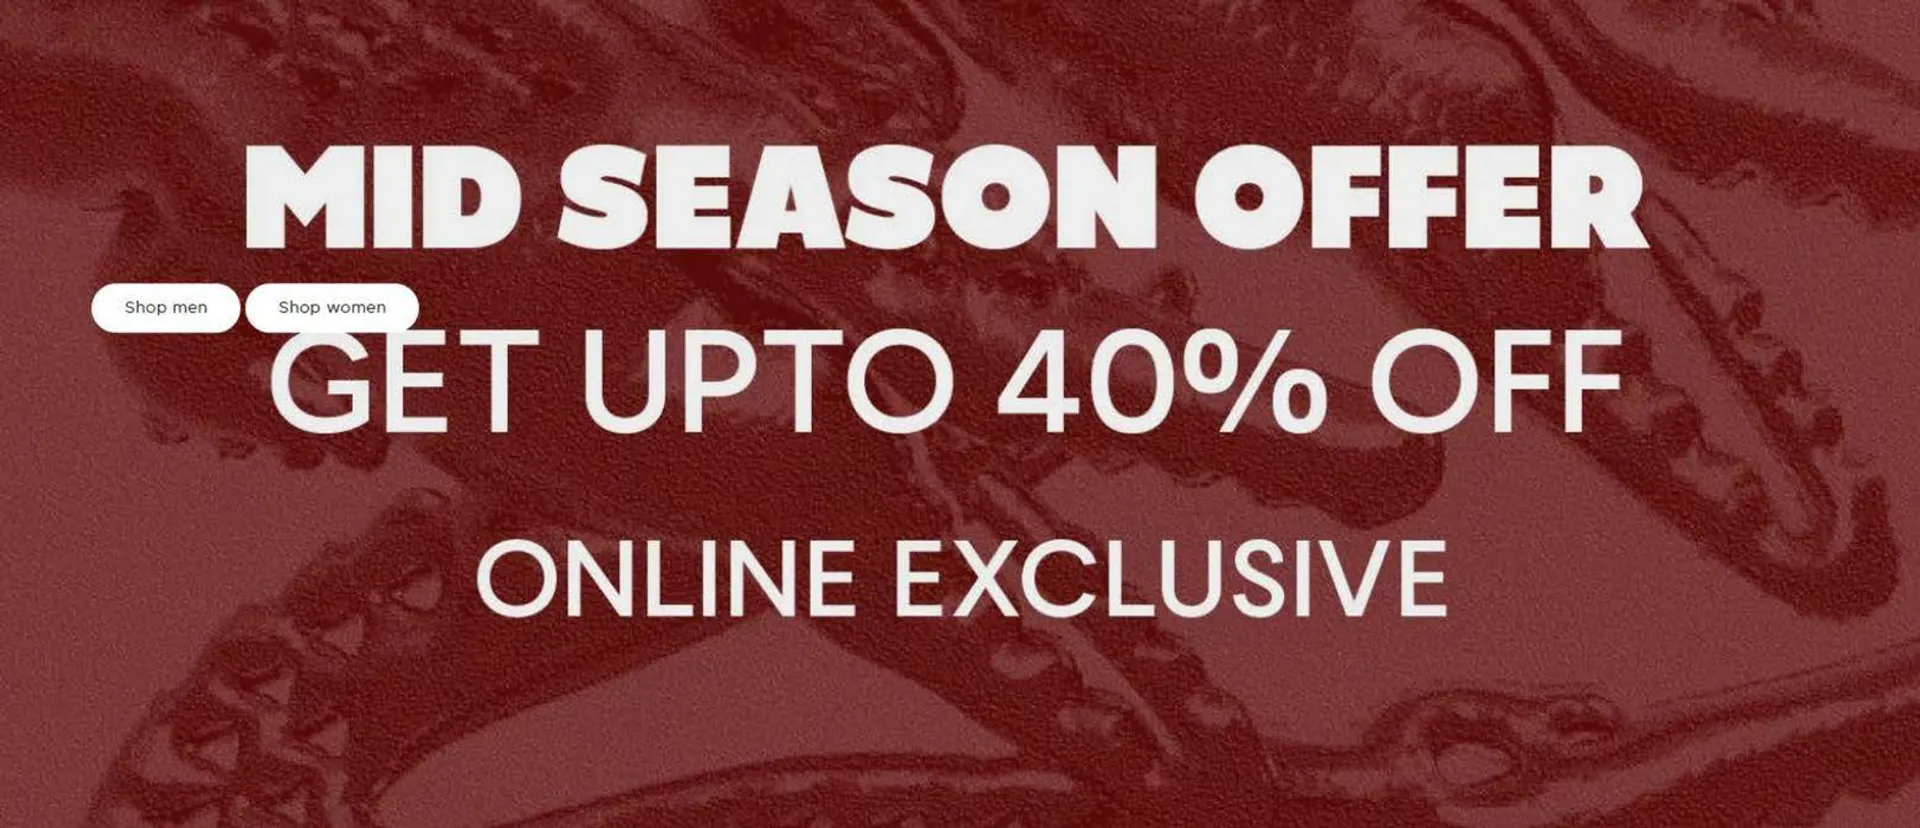 Get Up to 40% Off! - 1